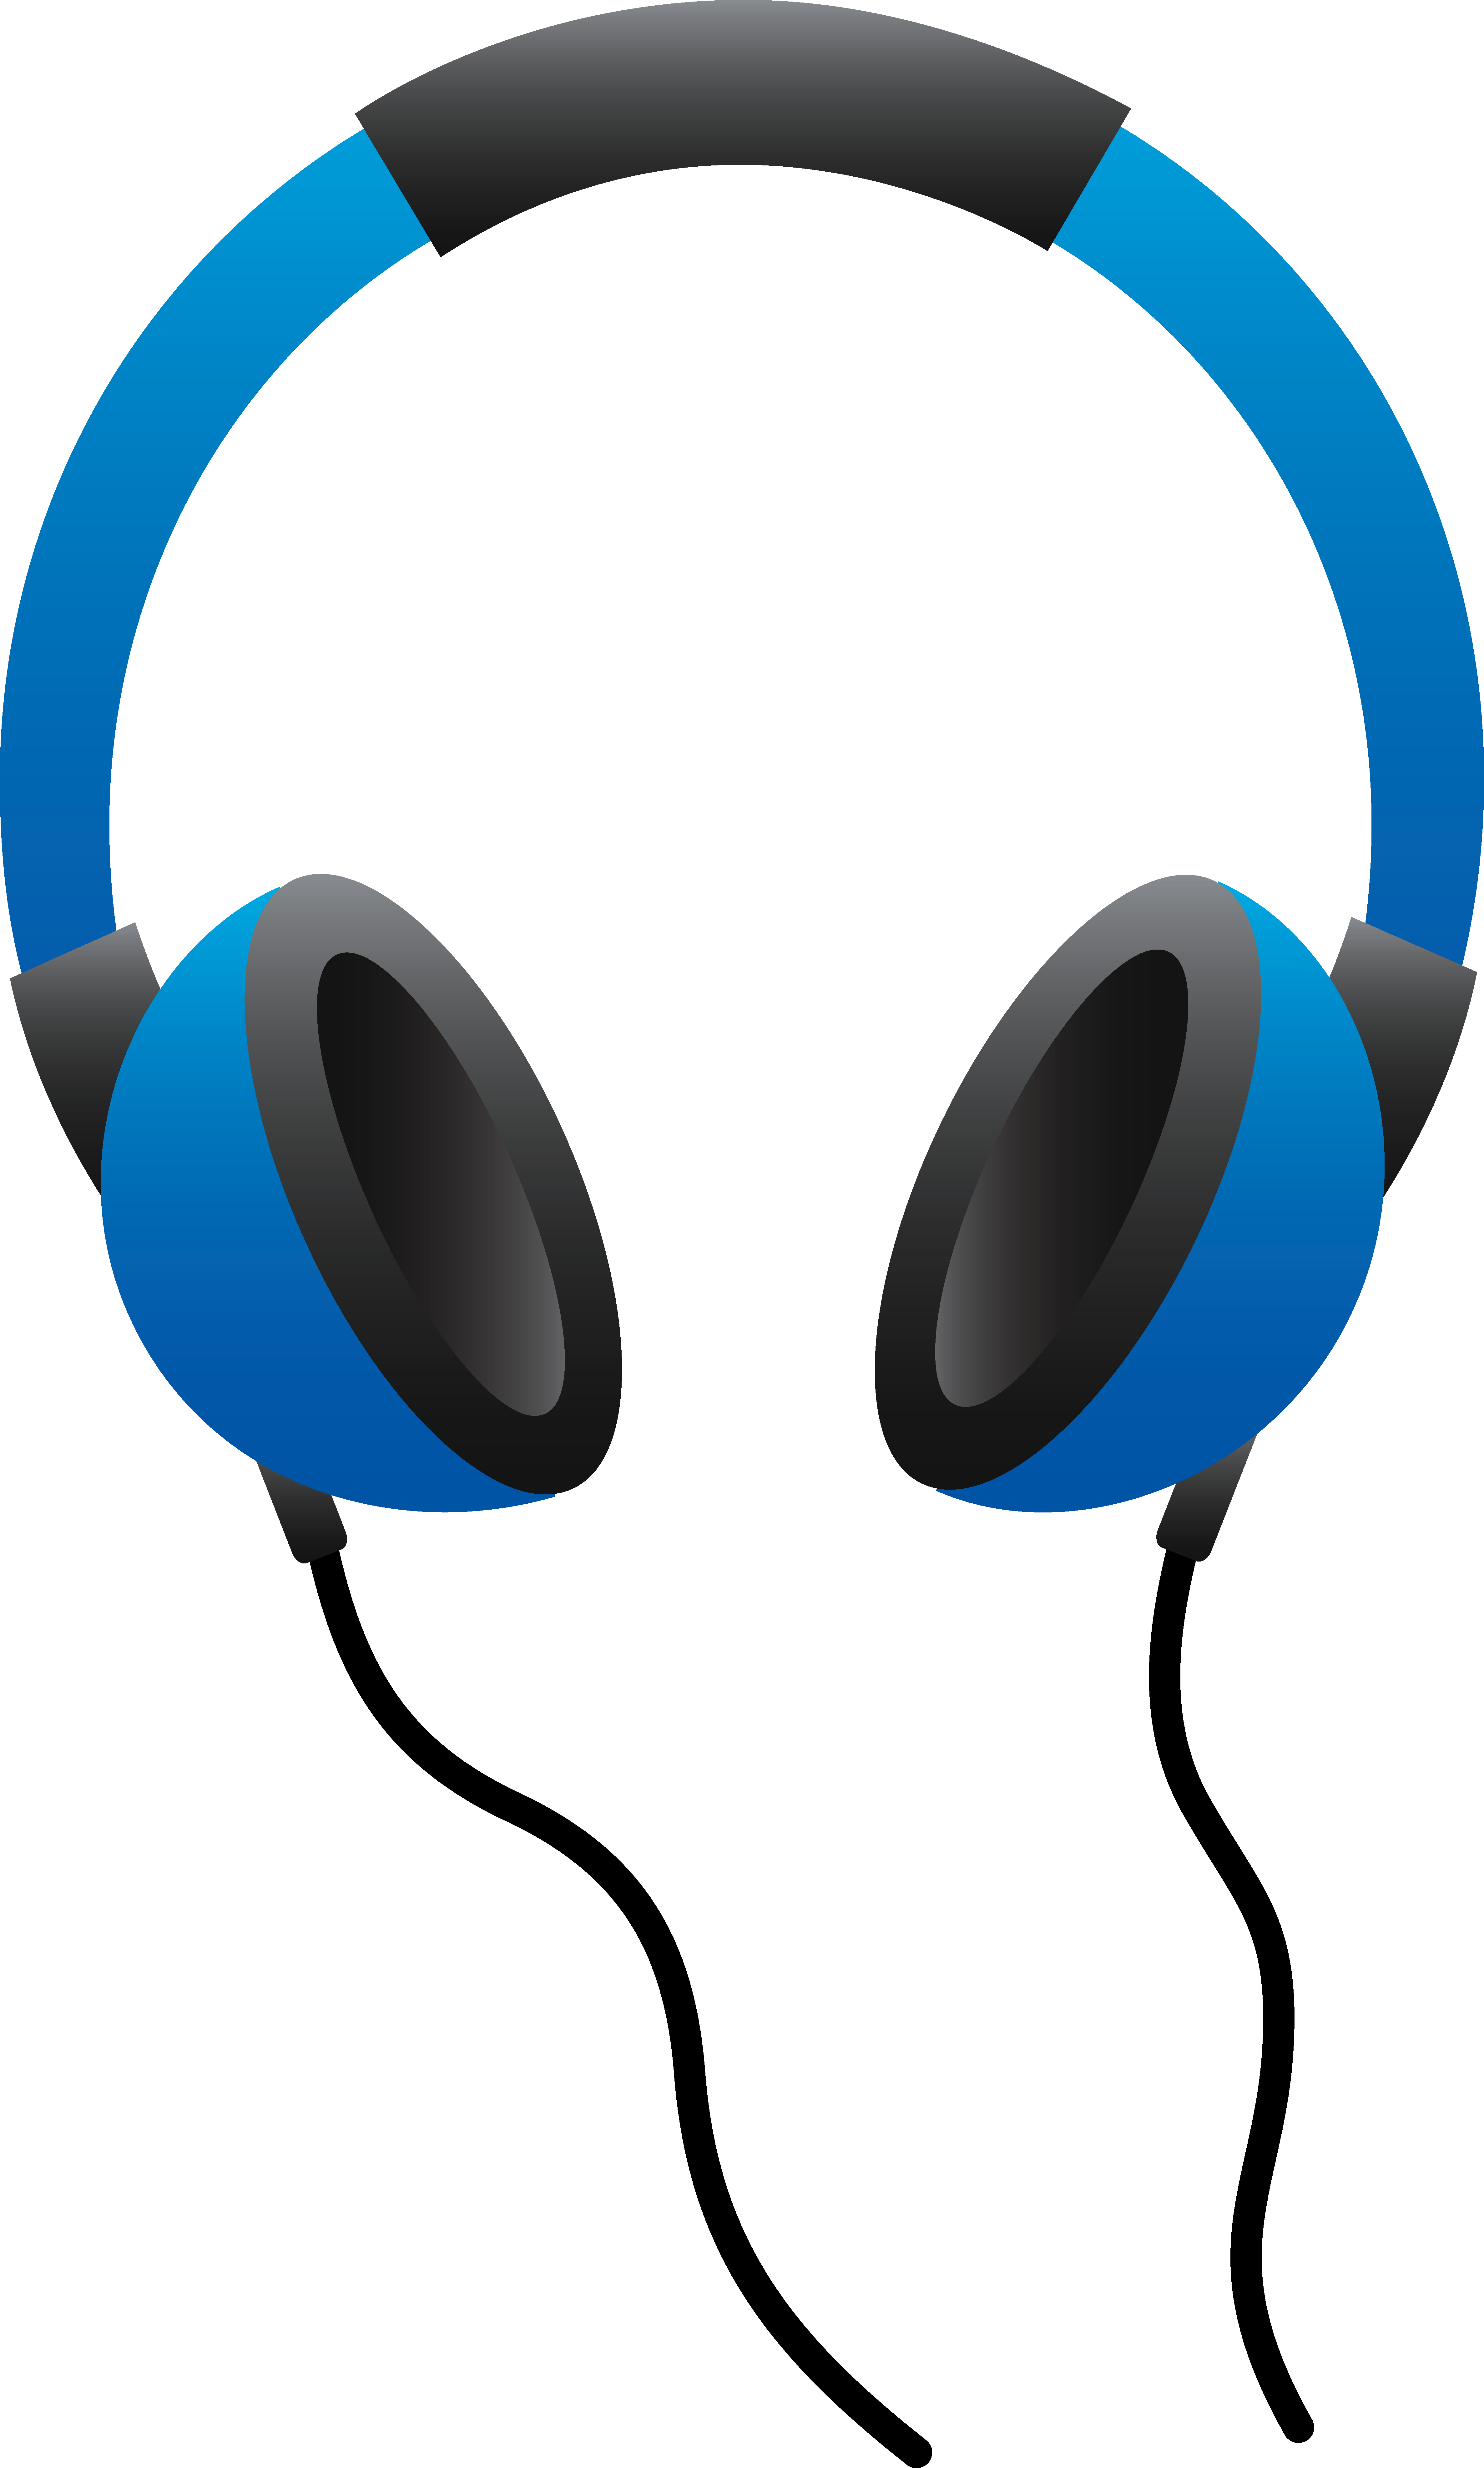 Free Headset Cliparts, Download Free Clip Art, Free Clip Art